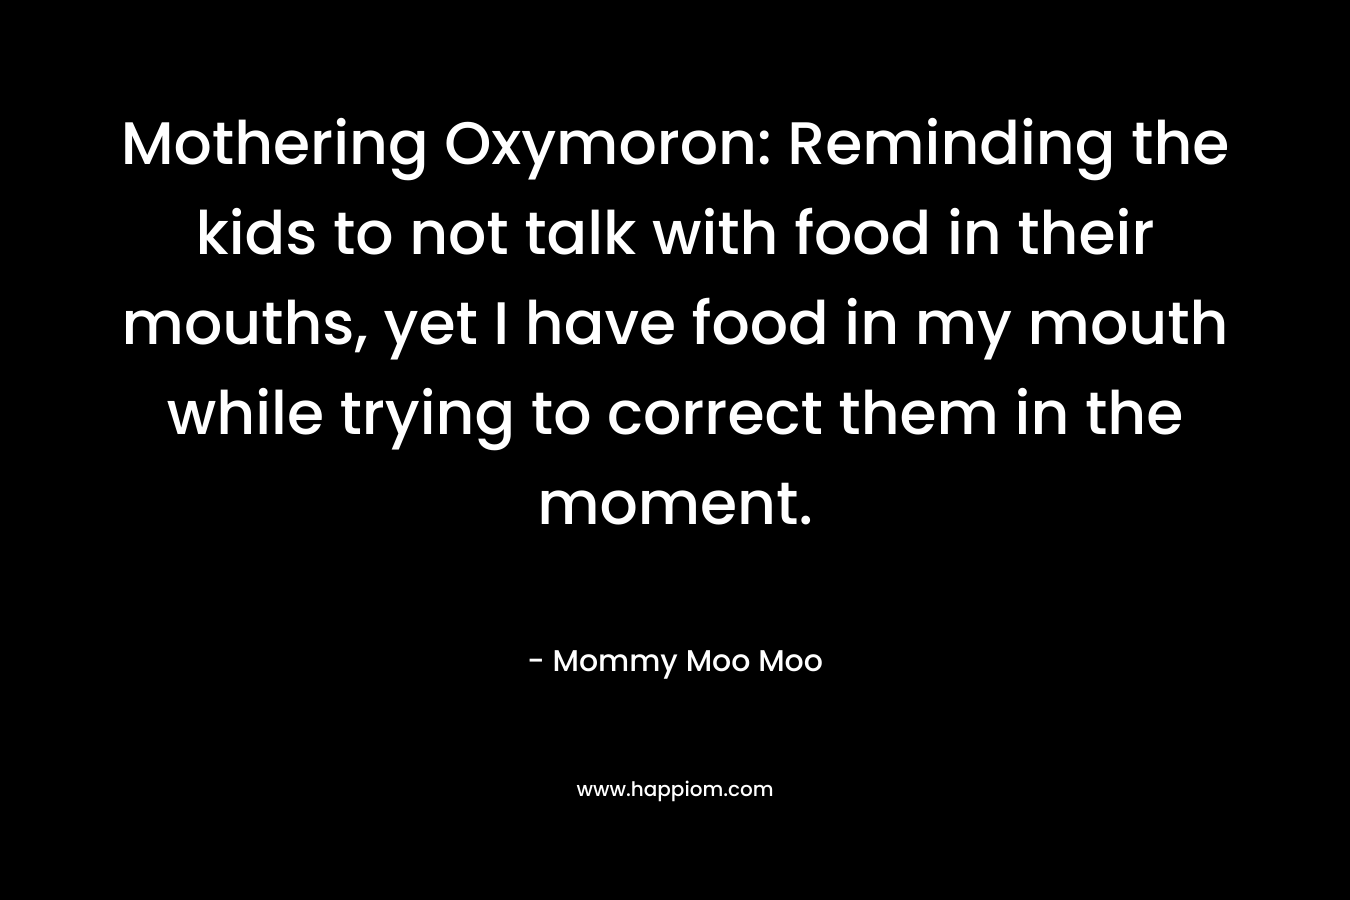 Mothering Oxymoron: Reminding the kids to not talk with food in their mouths, yet I have food in my mouth while trying to correct them in the moment. – Mommy Moo Moo